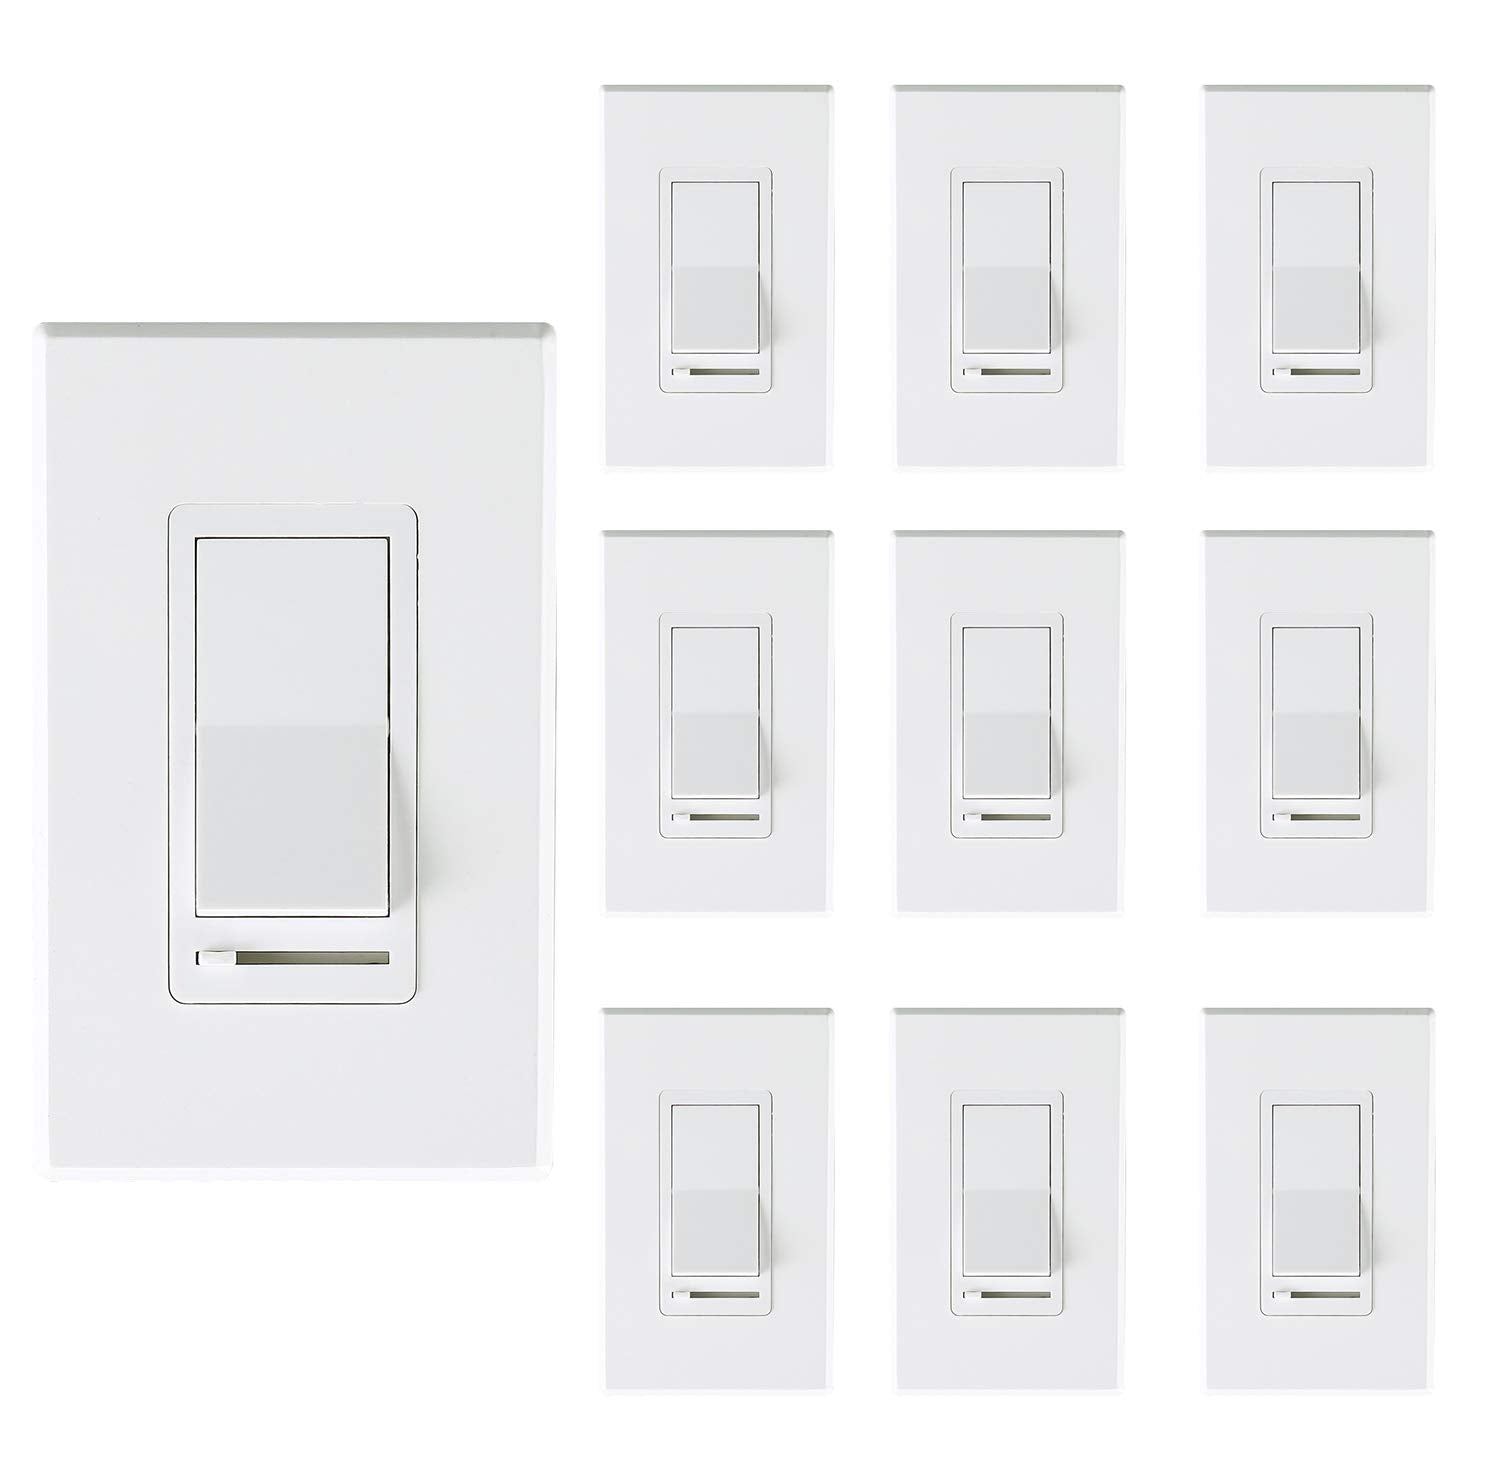 In Wall Dimmer Switch For LED Light/CFL/Incandescent, 3-way Single Pole, Cover Plate Included, White